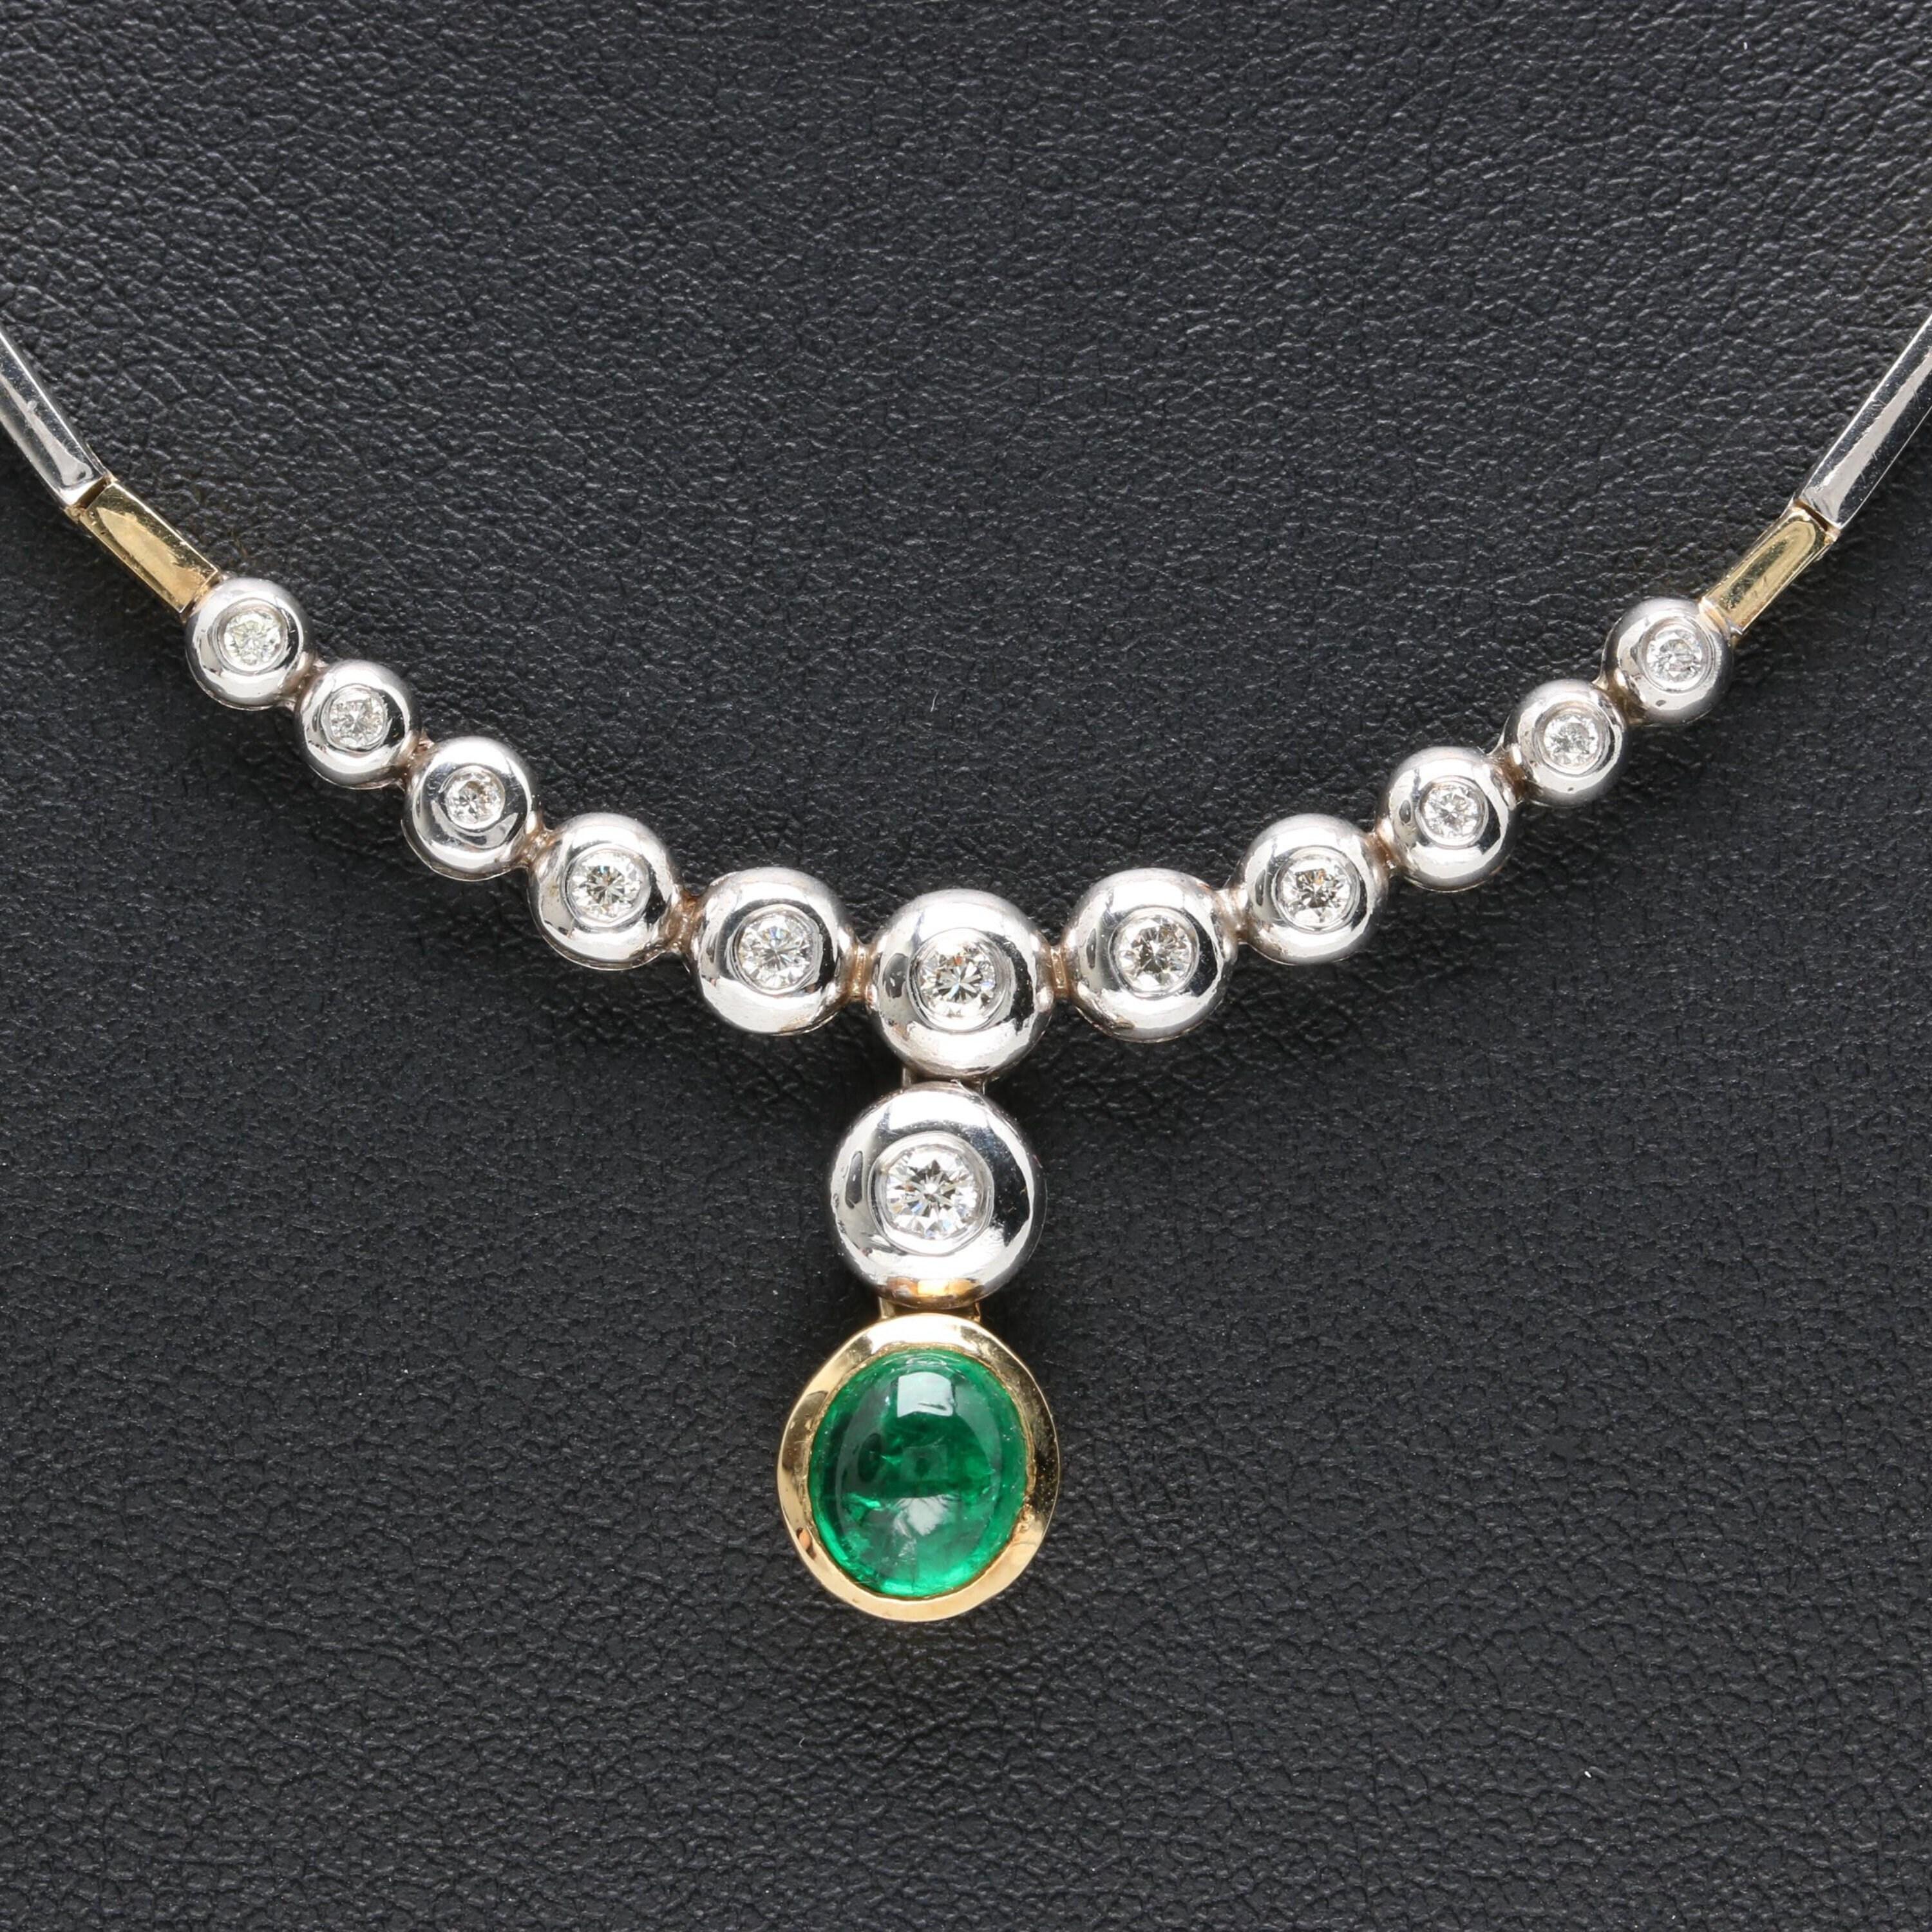 Modern Oval Cut Emerald Diamonds Necklace, Unique Bridal Natural Emerald Diamond Necklace,  Emerald Diamond Necklace
 
 Item Description
 → Handmade, Made to order
 → Material: SOLID 18K/18K GOLD
 
 Stone Details :
 
 CENTER DIAMONDS
 Count: 12
